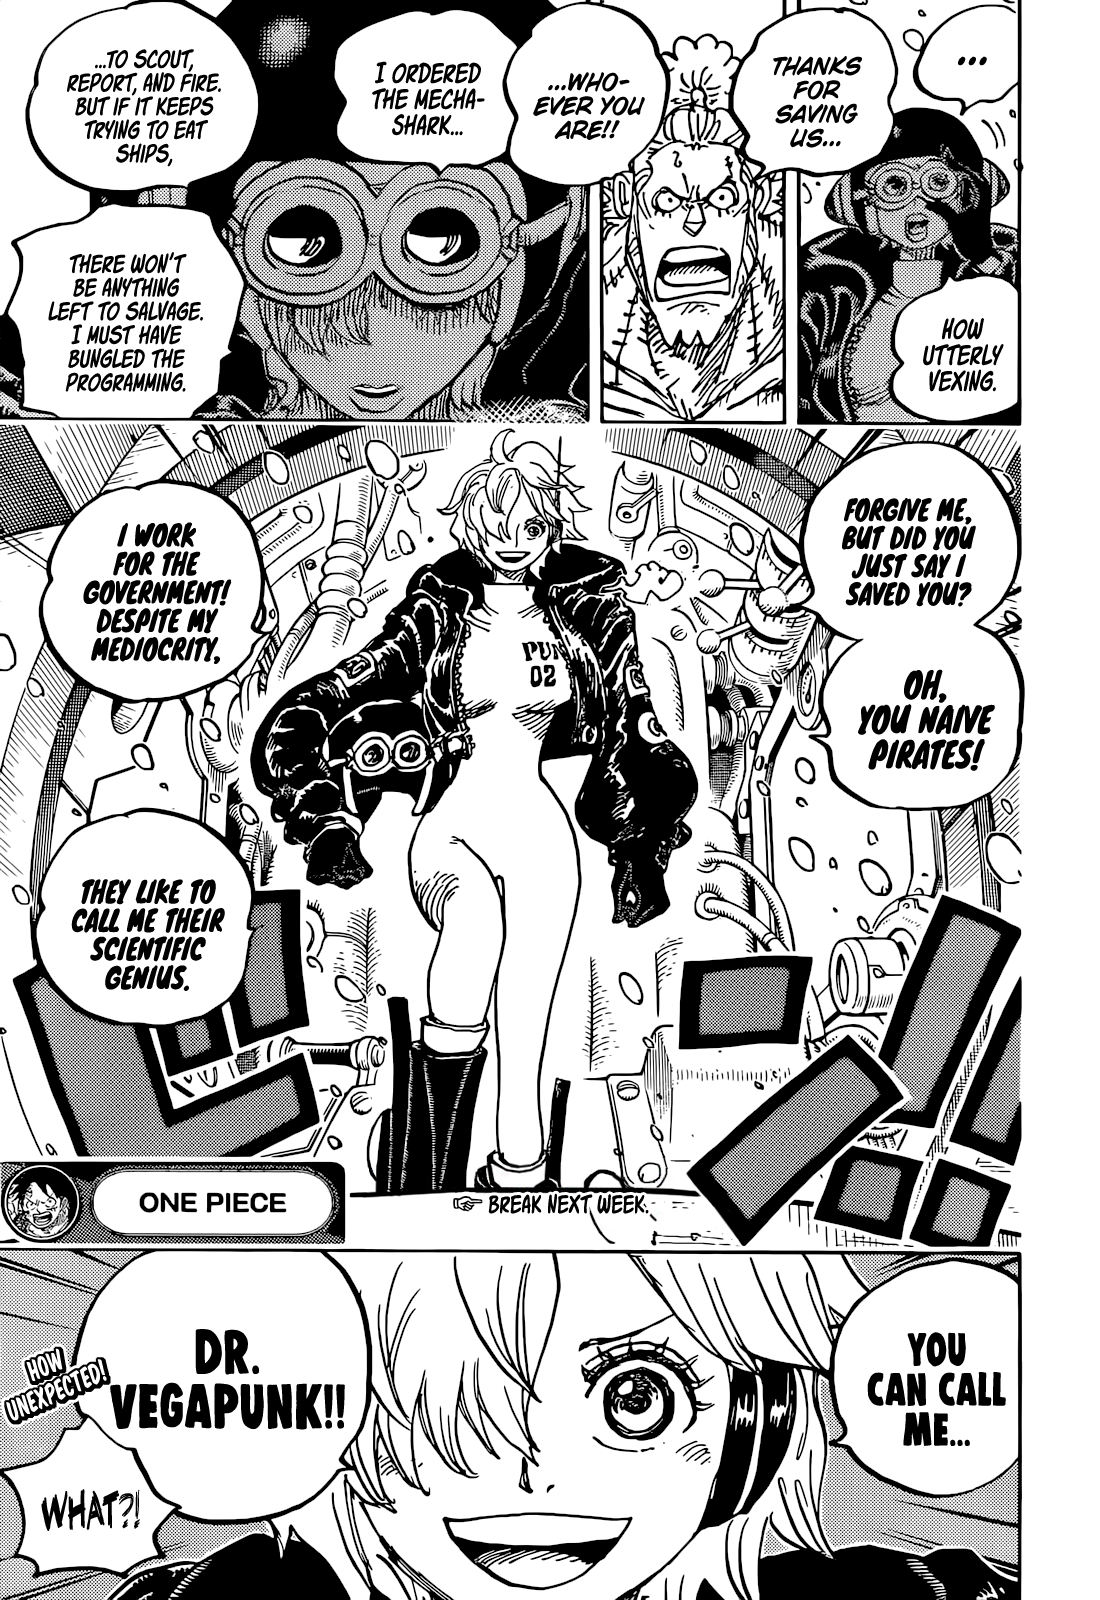 One Piece Chapter 1061 Spoilers & Brief Summary